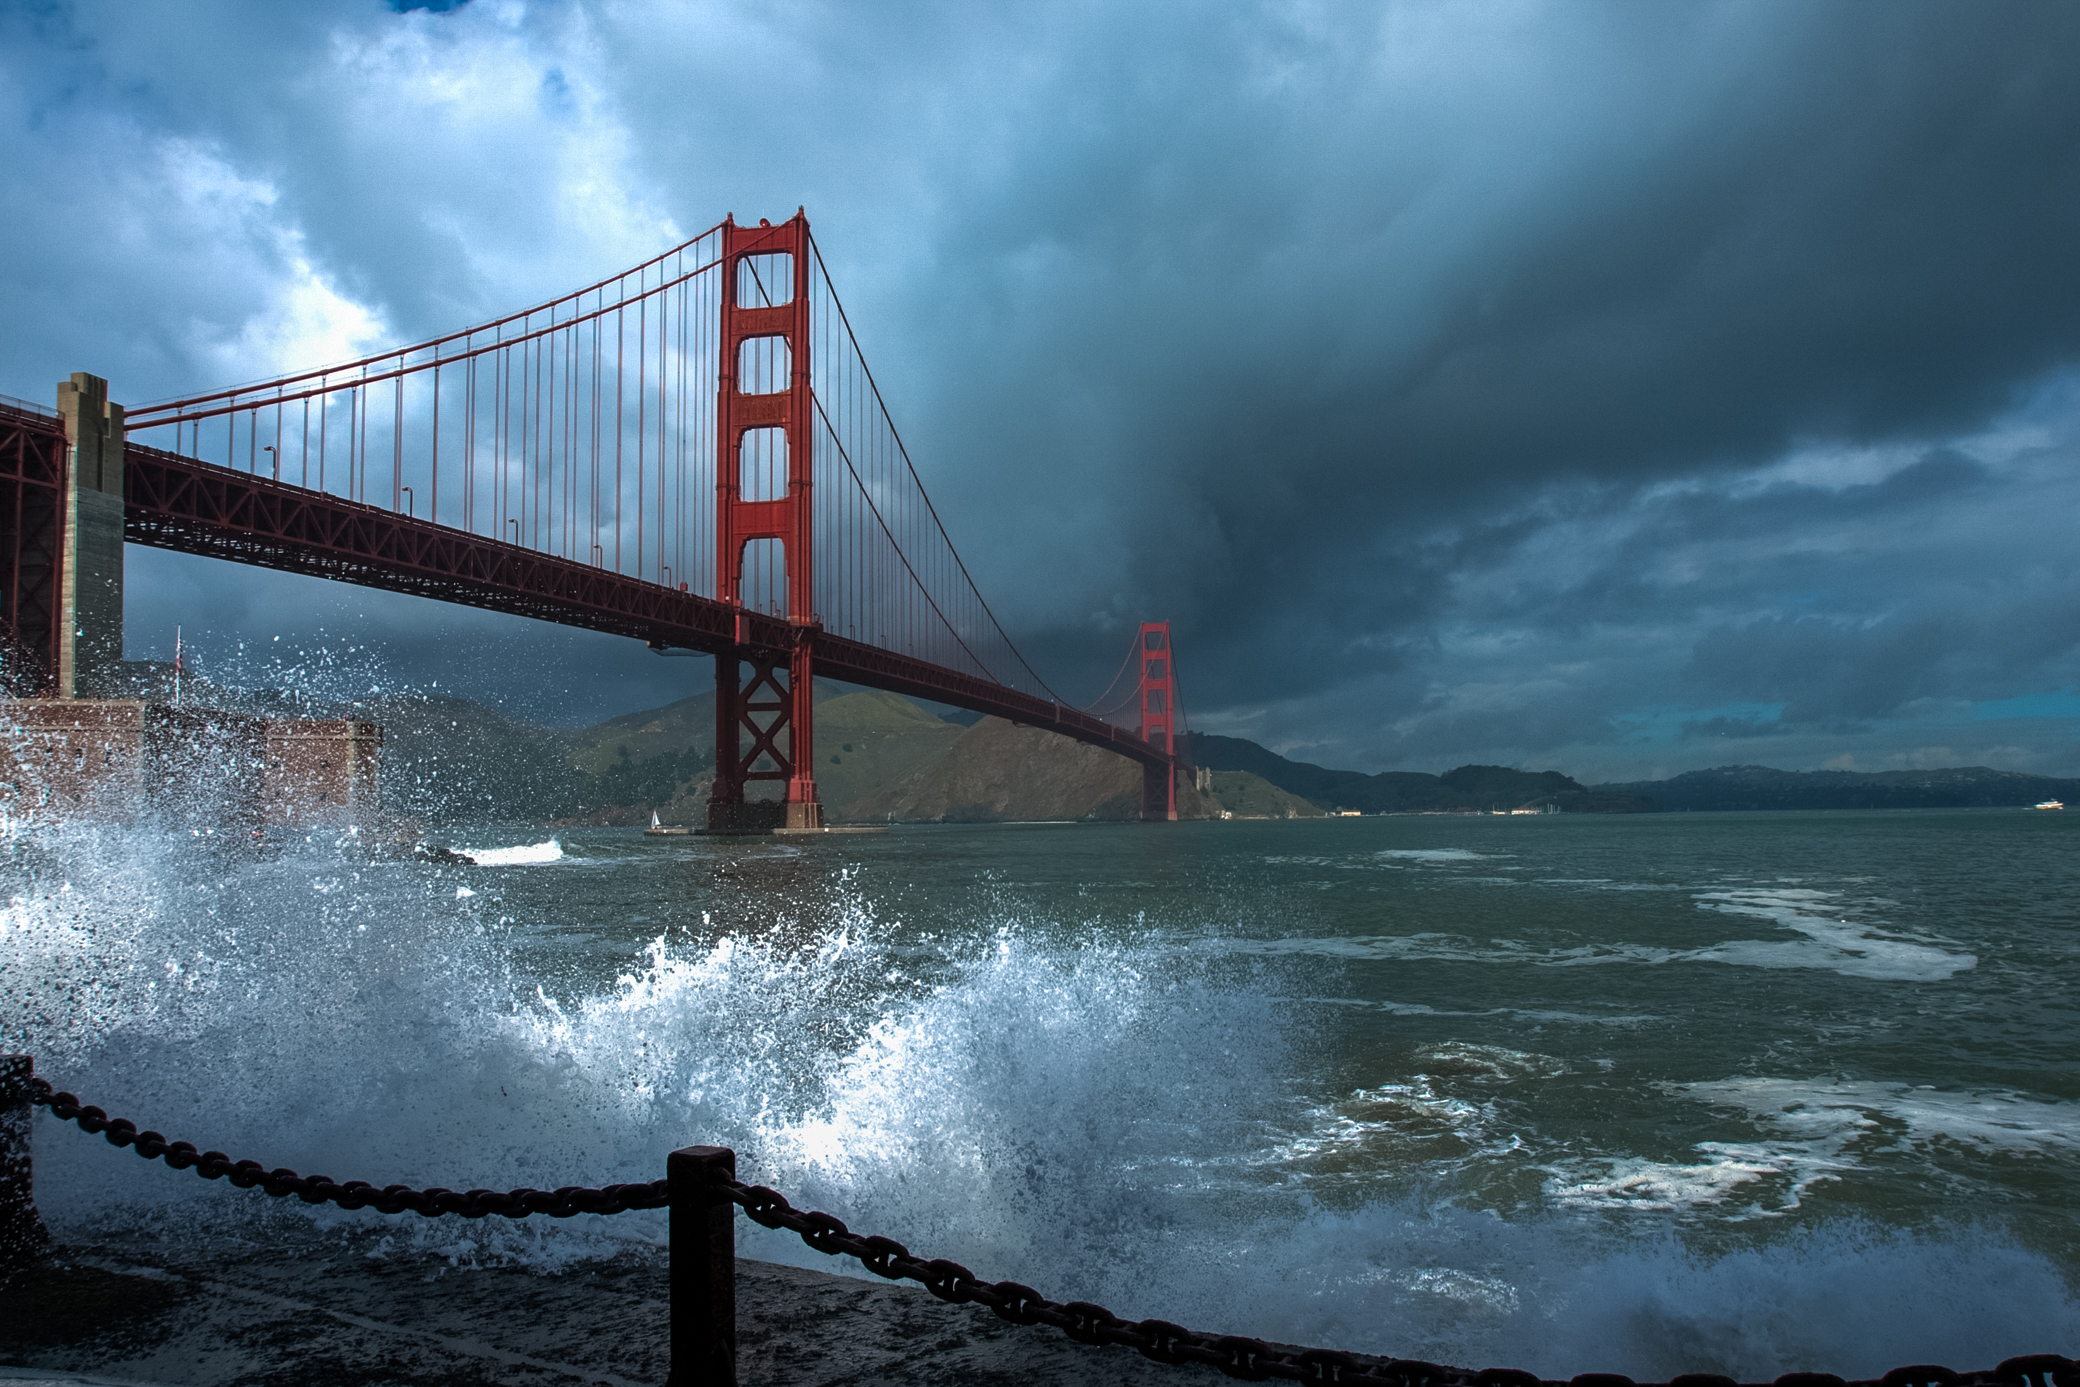 Orange Golden Gate Bridge with waves crashing in foreground and storm clouds behind.